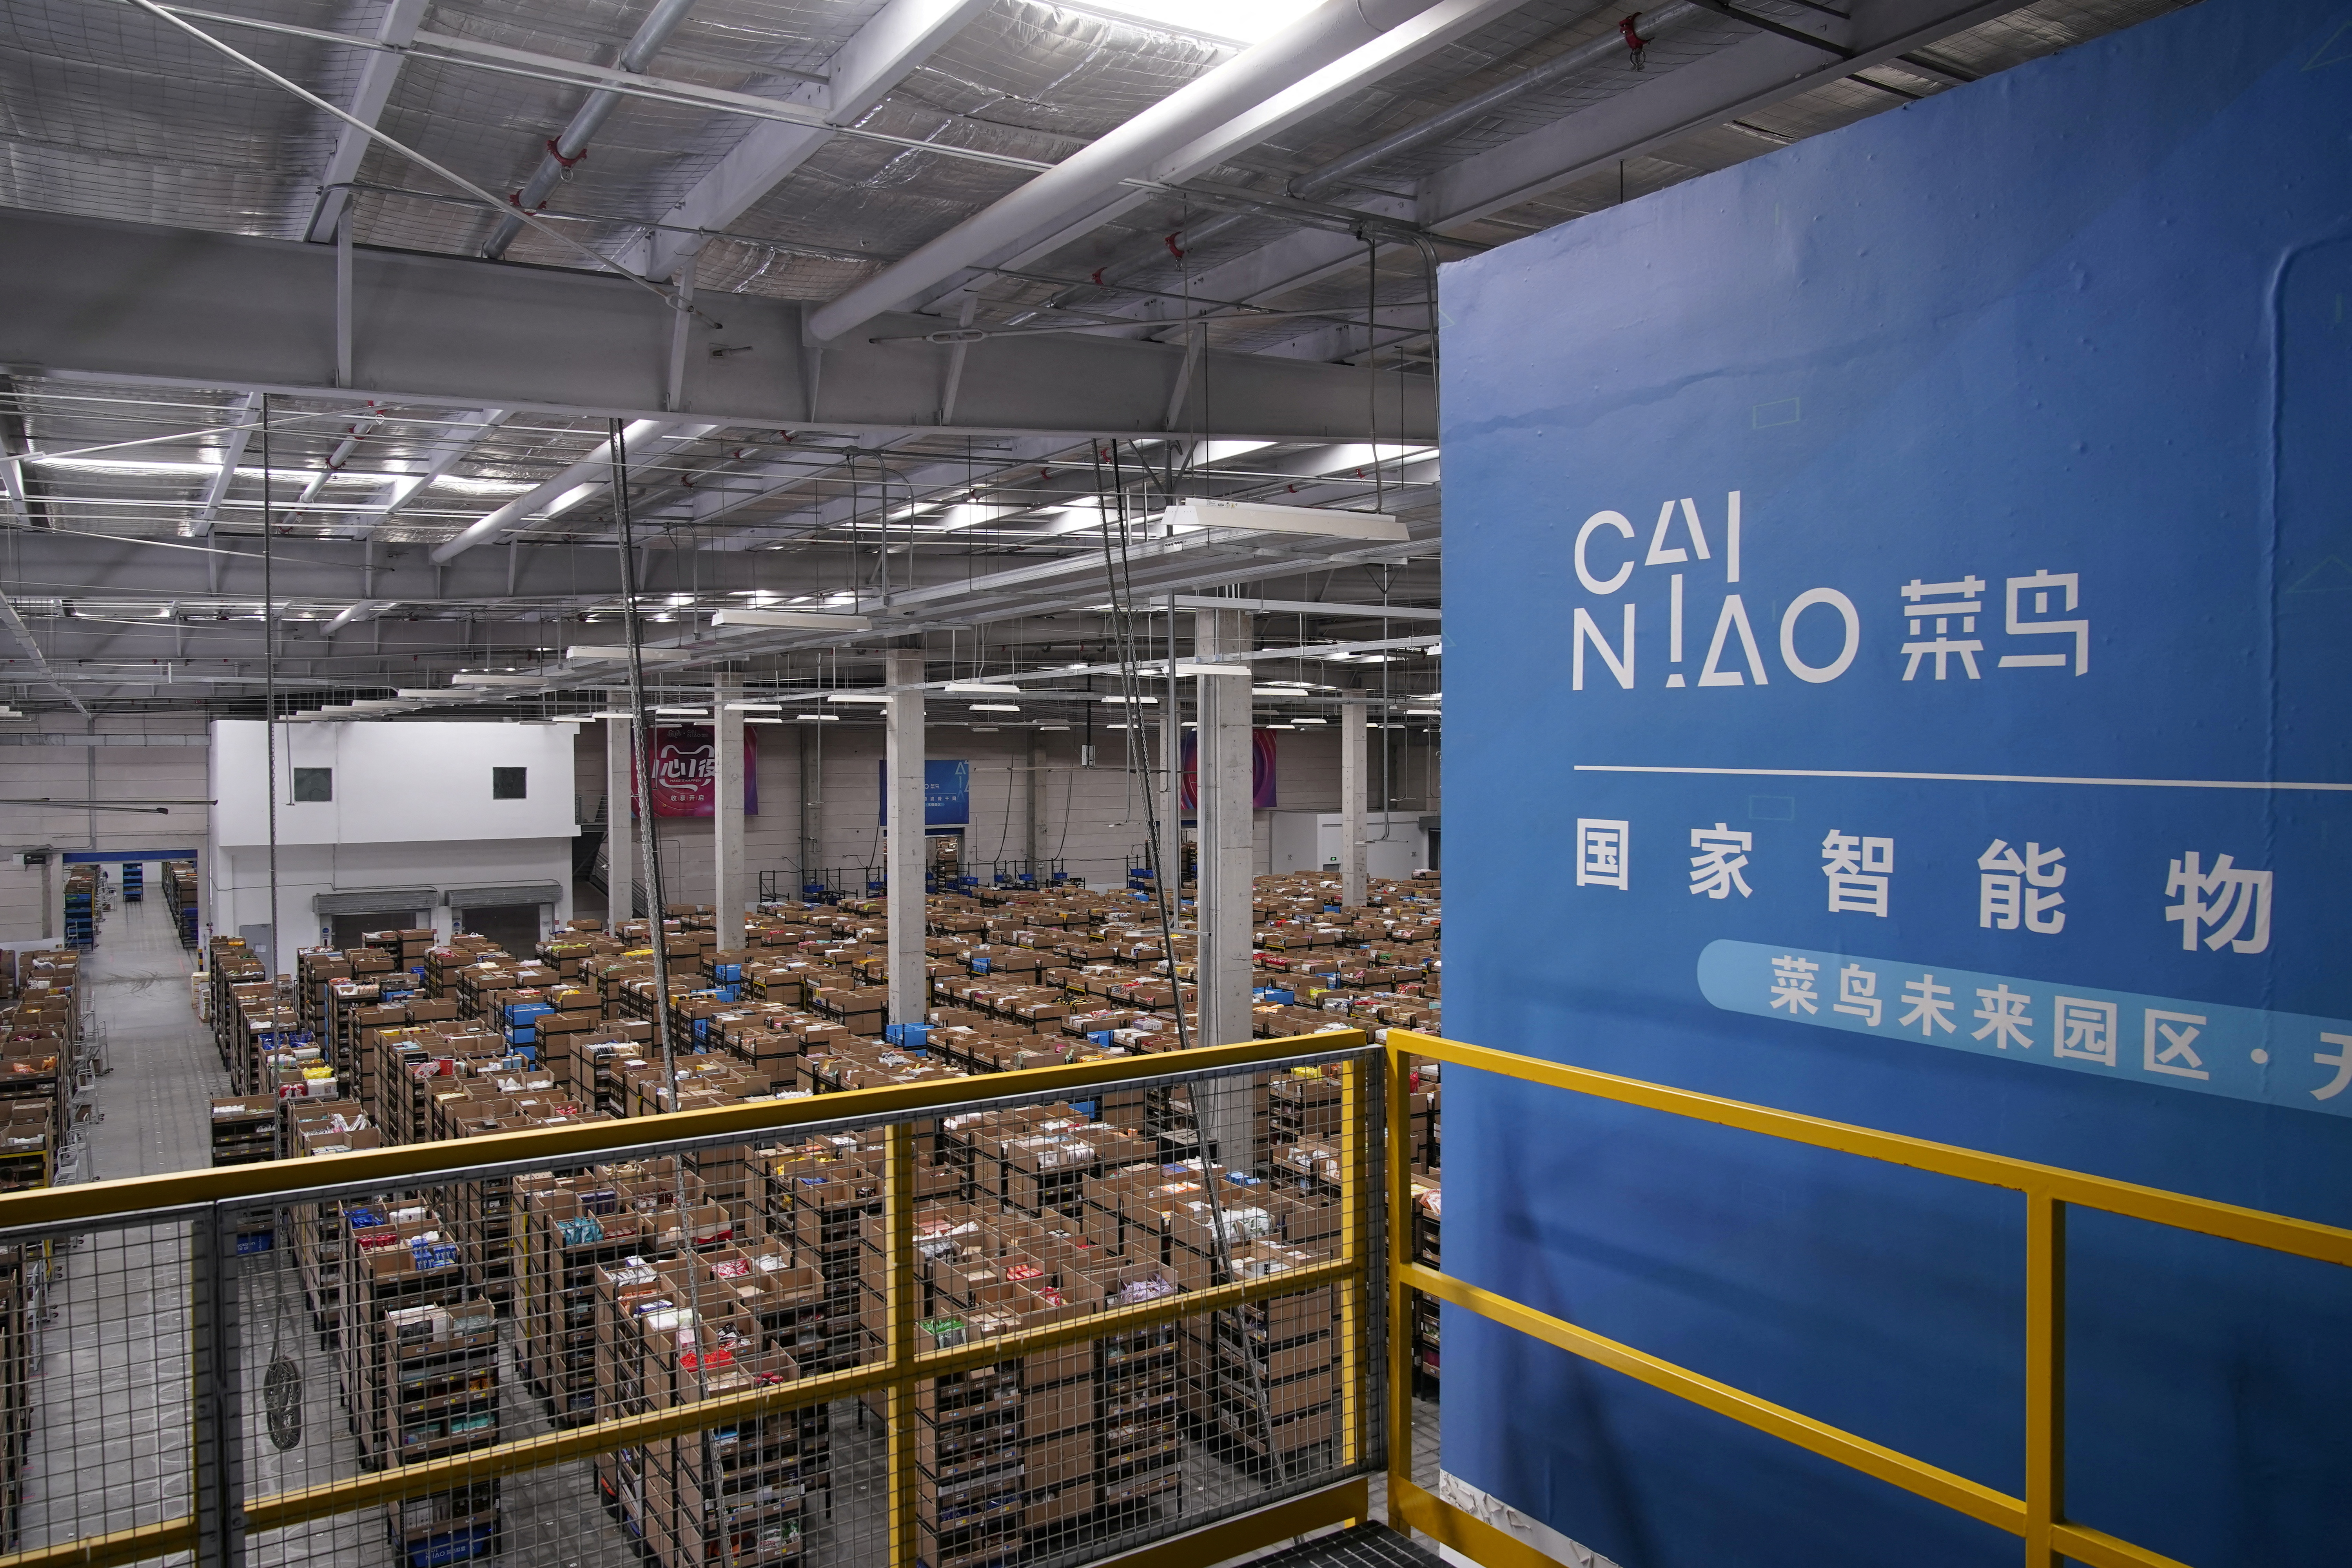 Cainiao's logo, Alibaba's logistics unit, is seen at the warehouse in Wuxi